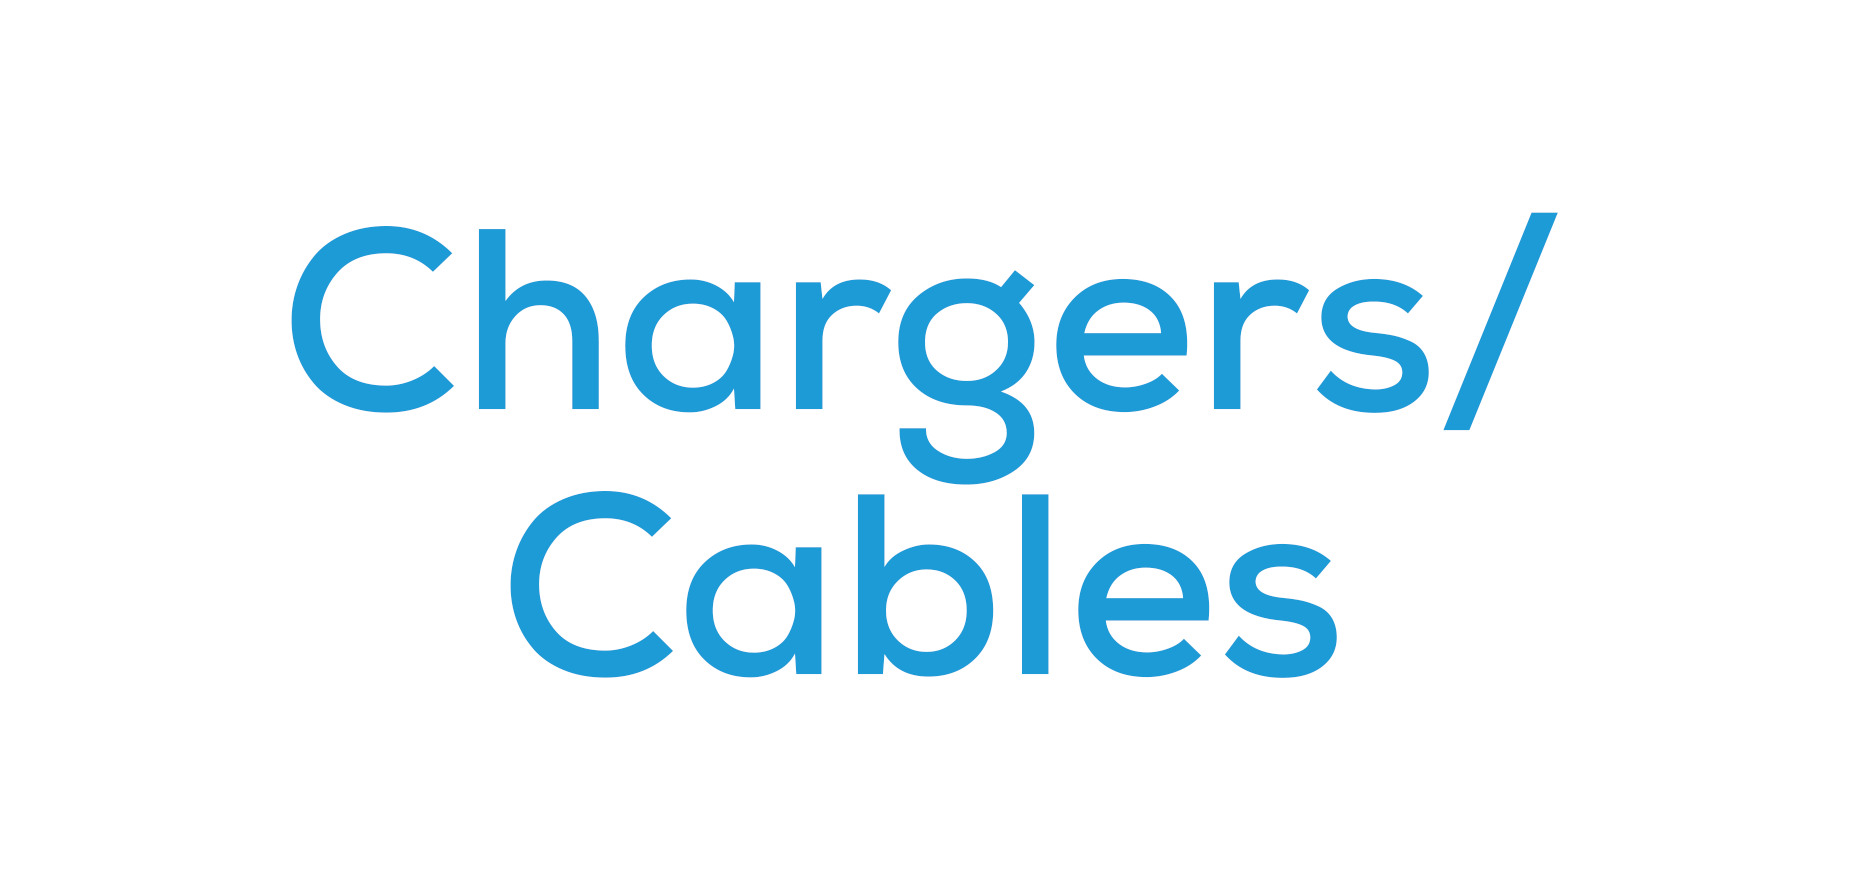 Chargers / Cables